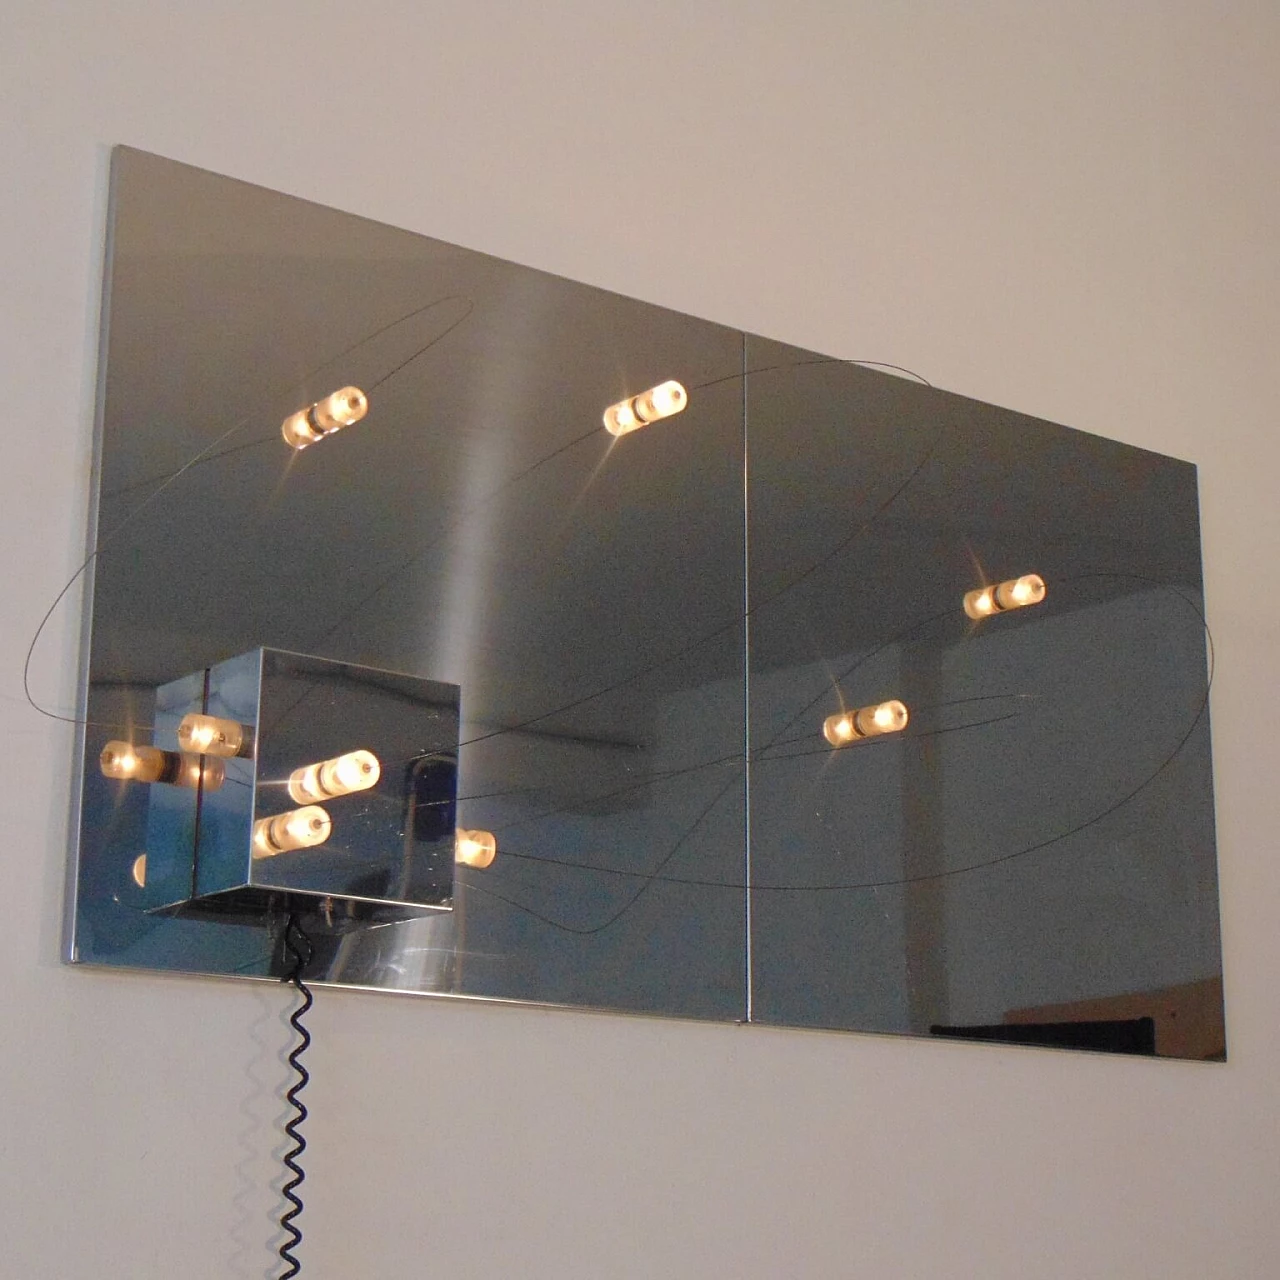 Mirrored Wall Lamp with Magnetic Movable Lights by ARDITI, Sormani Nucleo, Italy 1069173